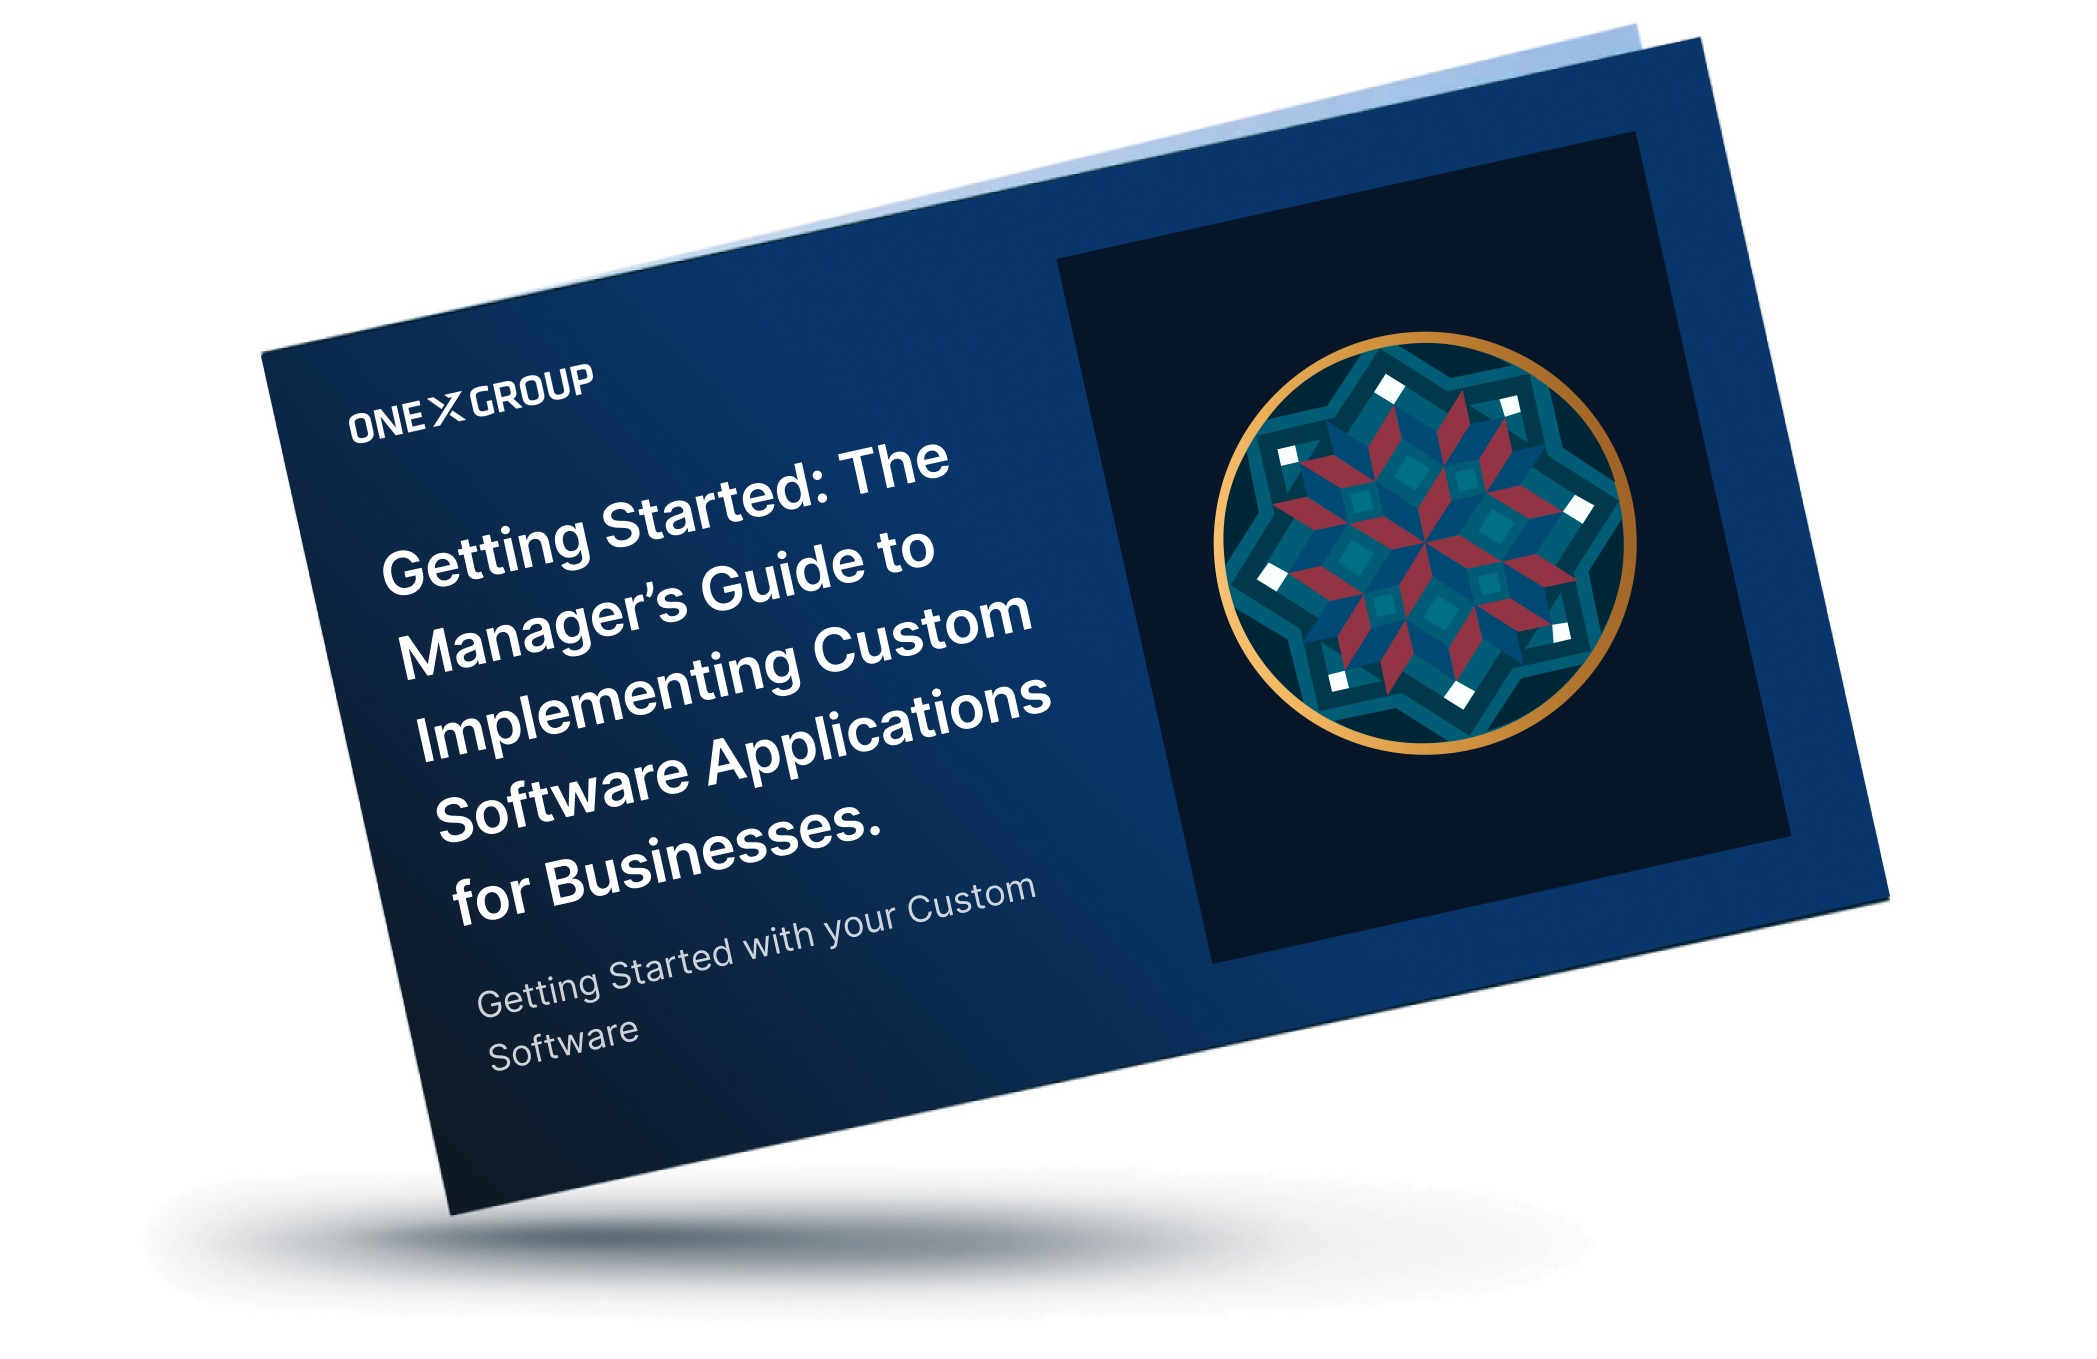 The Manager’s Guide to Implementing Custom Software Applications for Businesses